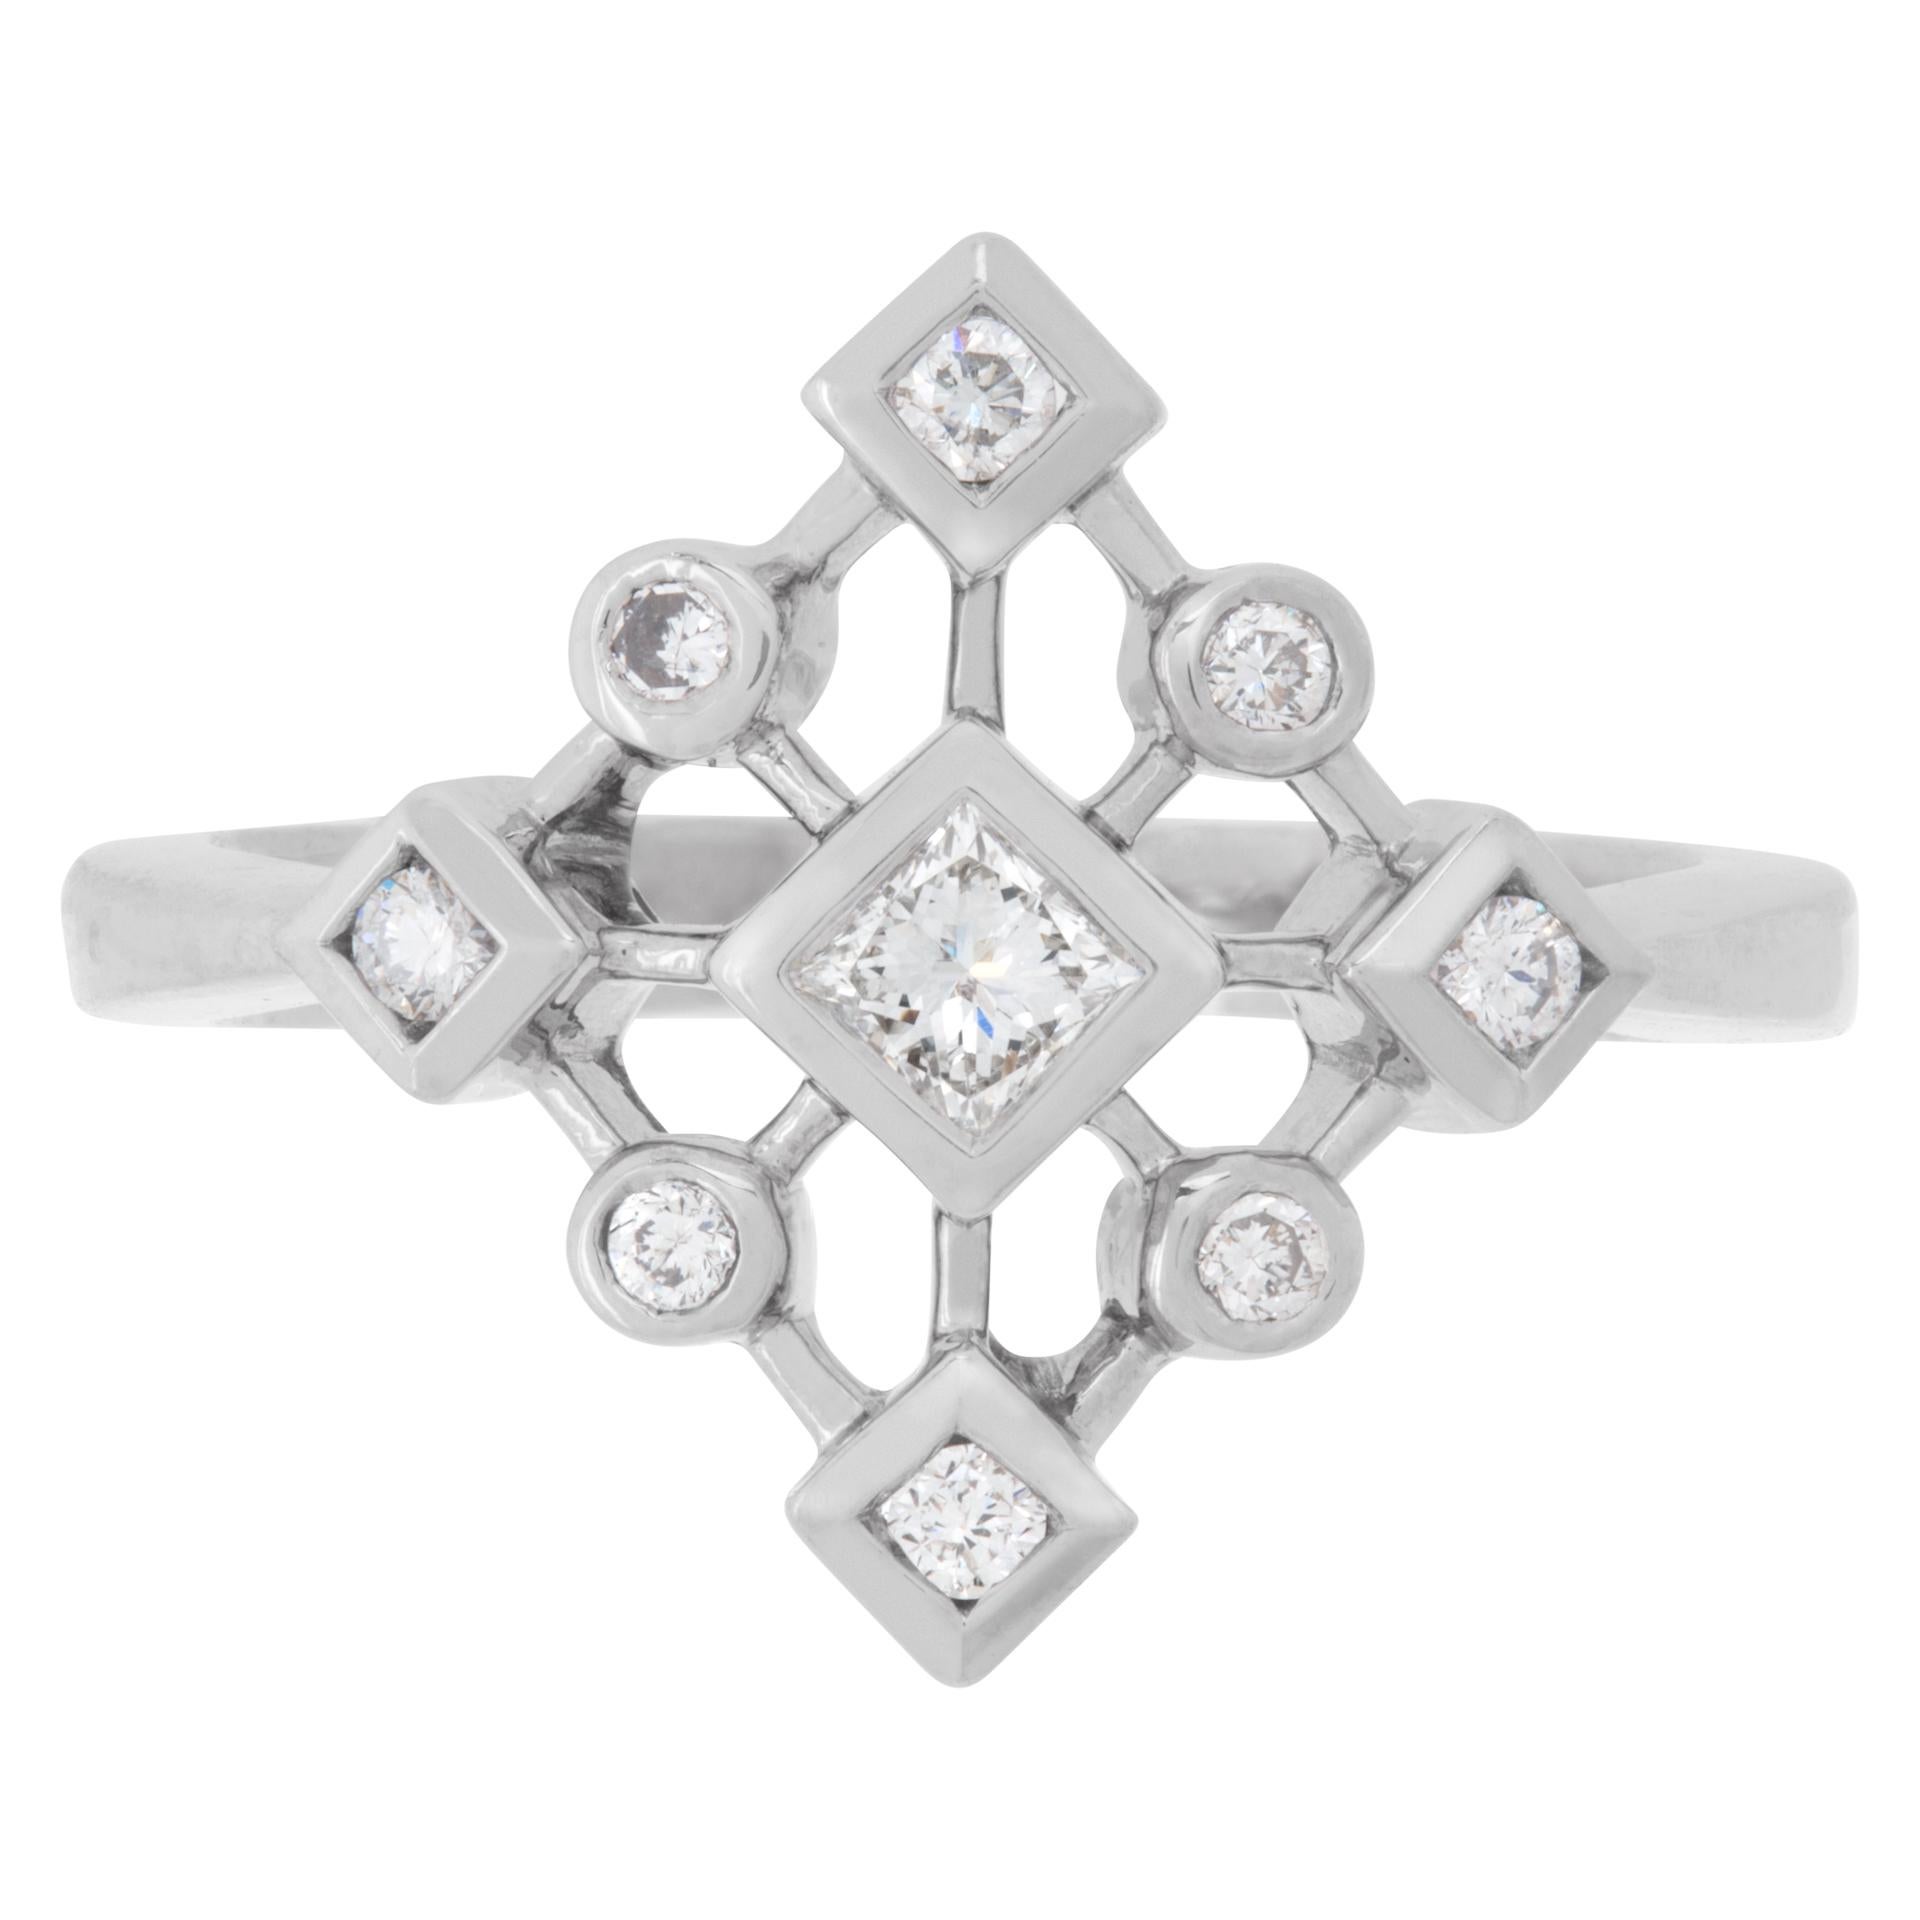 14k white gold snowflake ring with 0.25 carat in princess cut and round G-H color, VS-SI clarity diamonds. Size 6This Diamond ring is currently size 6 and some items can be sized up or down, please ask! It weighs 2.3 pennyweights and is 14k White